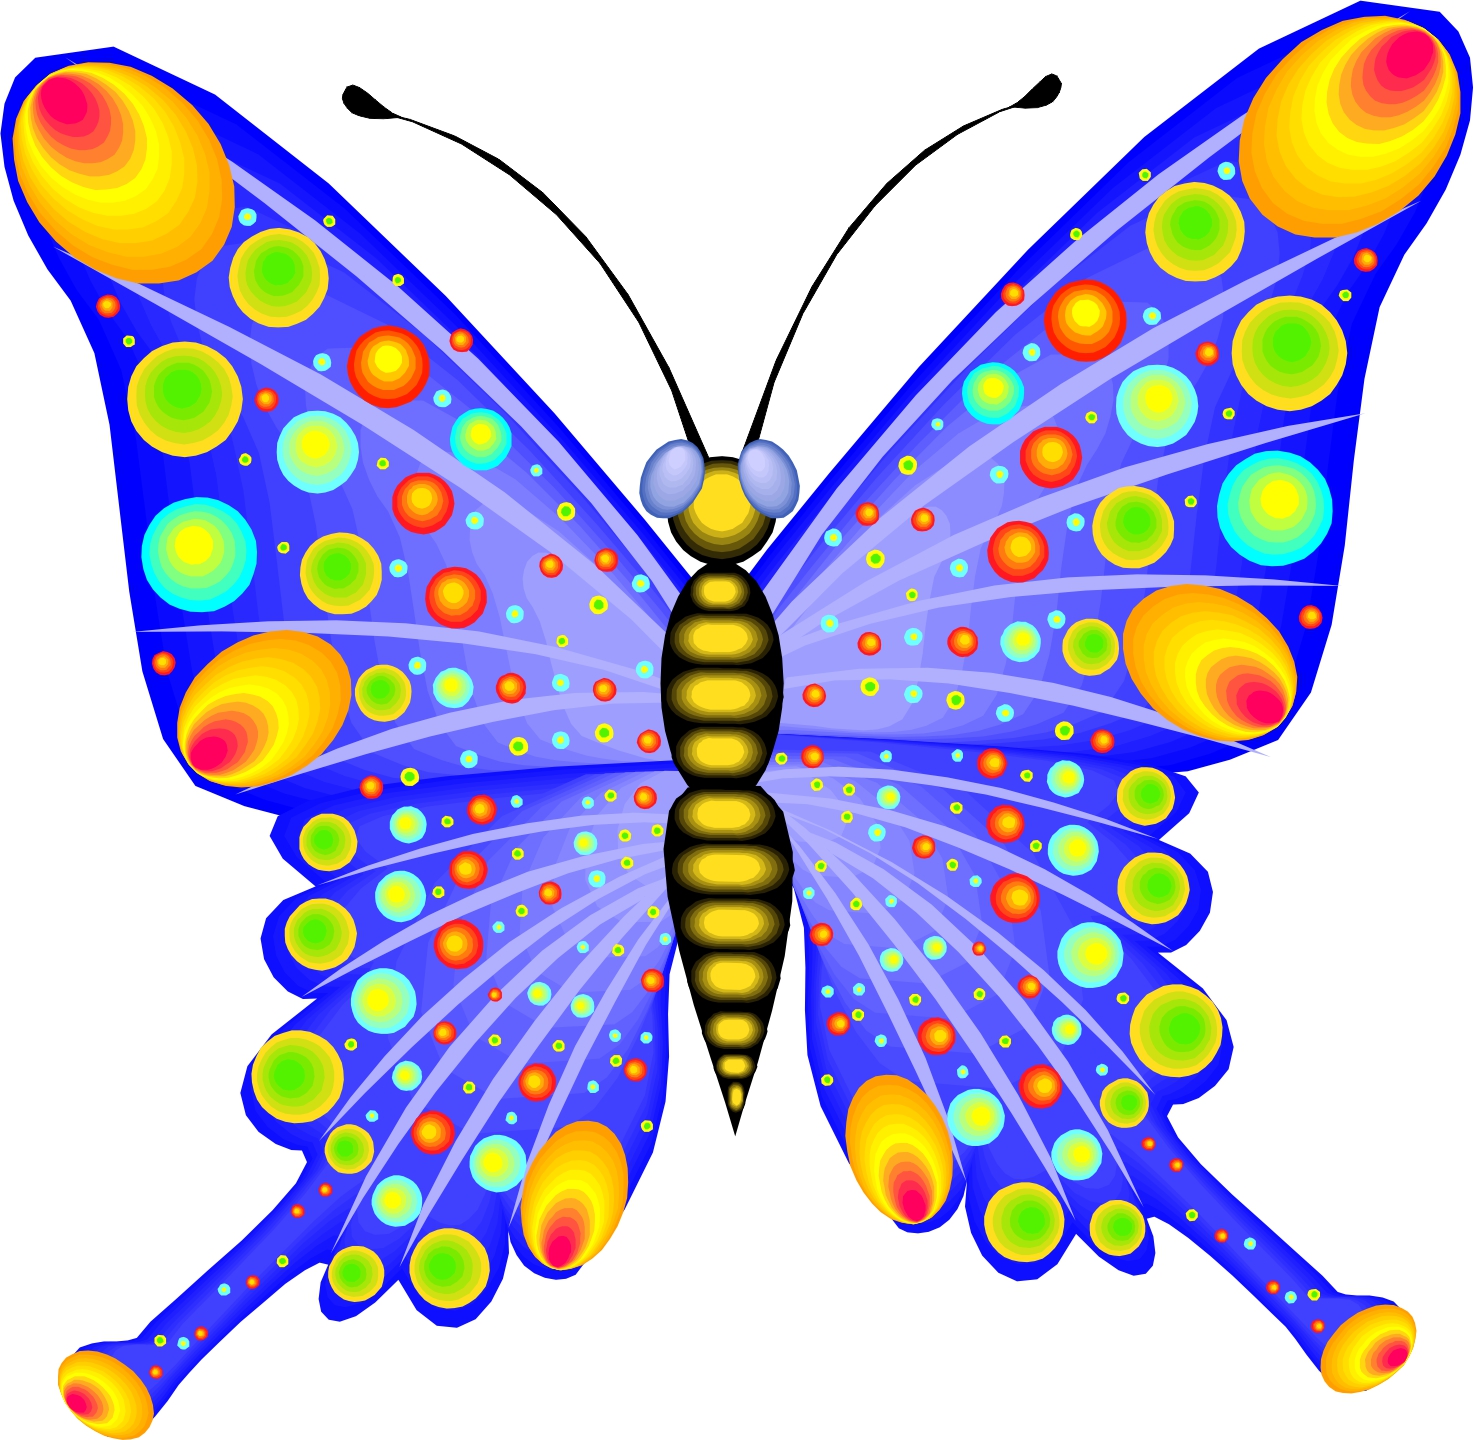 Cartoon Butterfly Images | Free Download Clip Art | Free Clip Art ... -  ClipArt Best - ClipArt Best